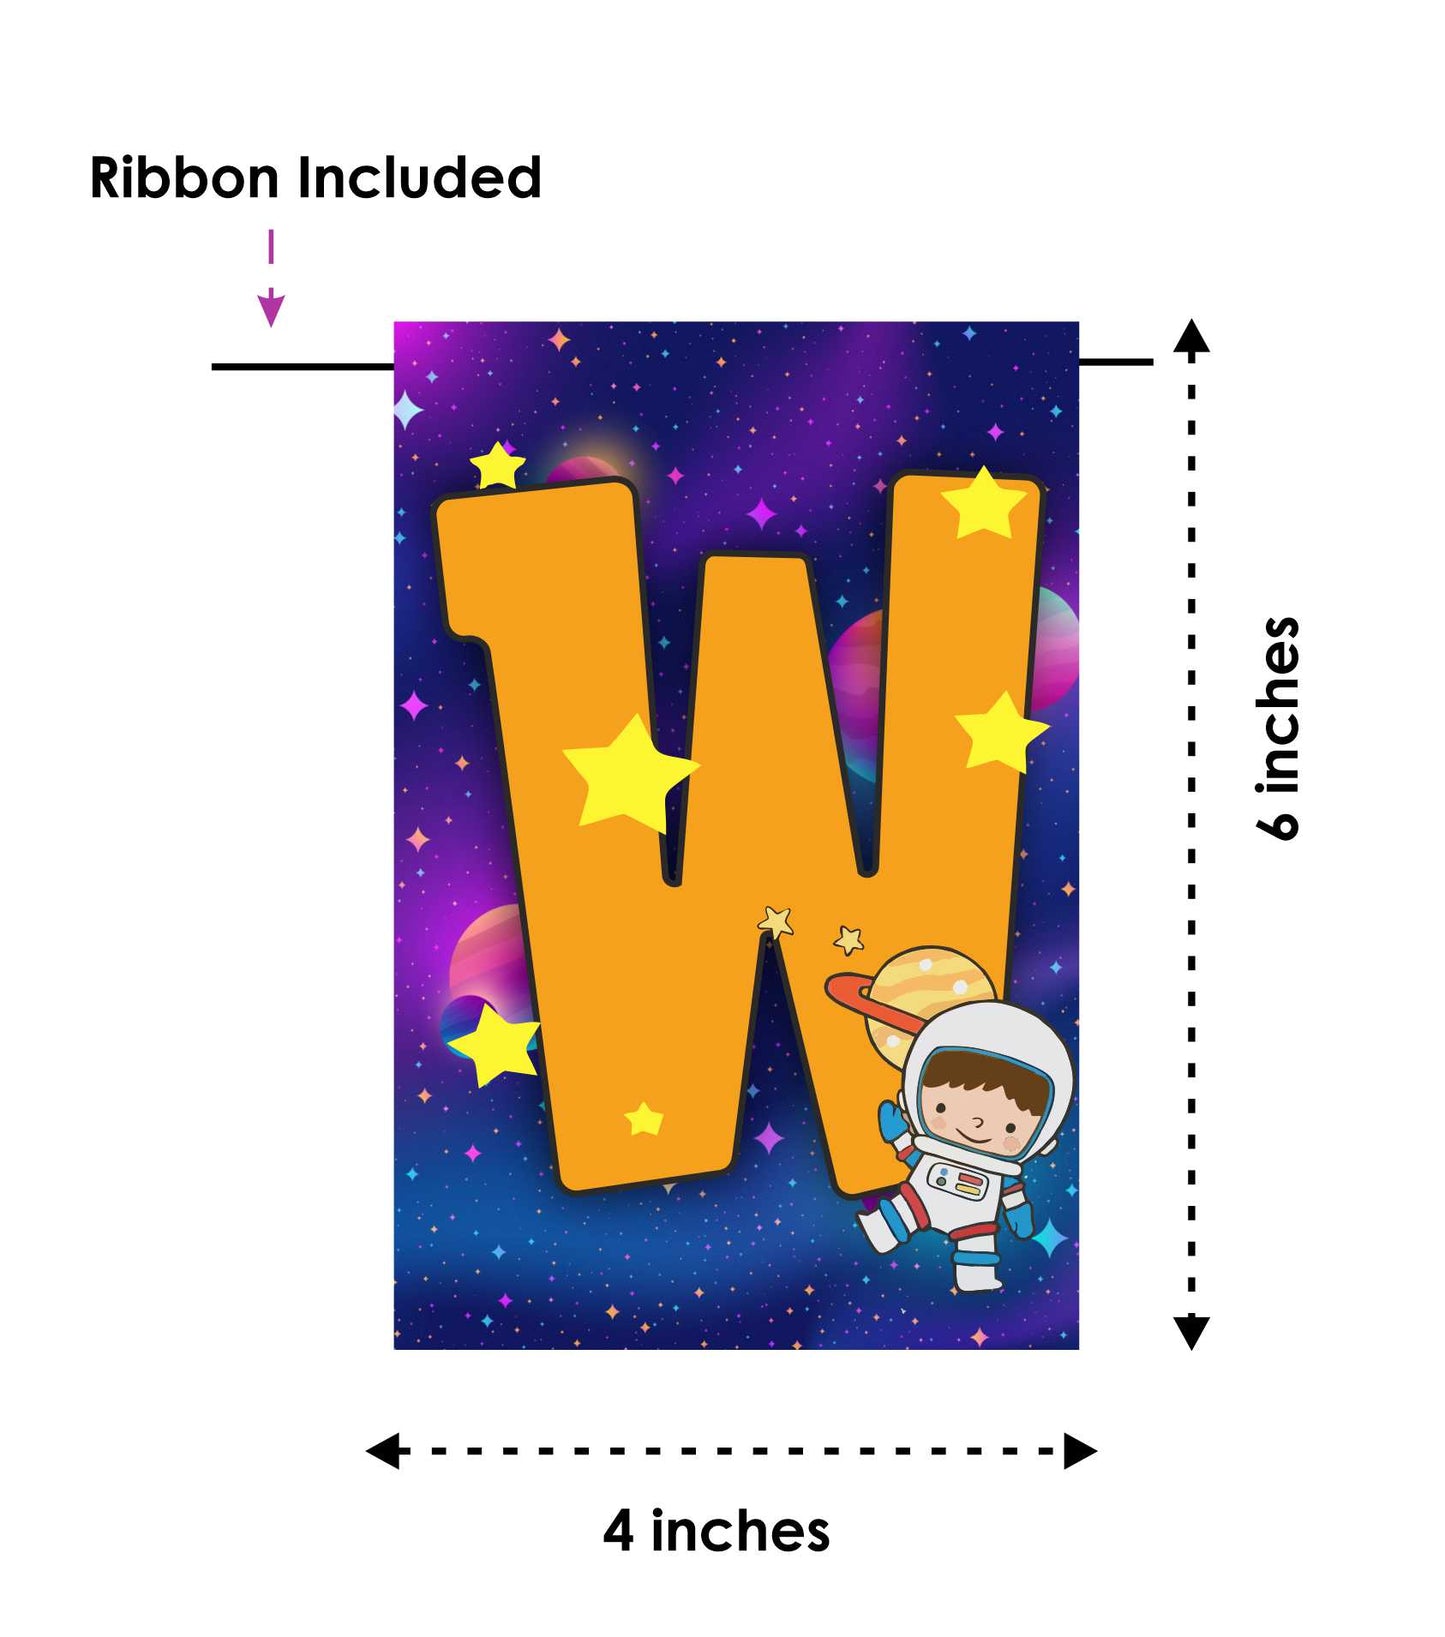 Space Theme Welcome Banner for Party Entrance Home Welcoming Birthday Decoration Party Item